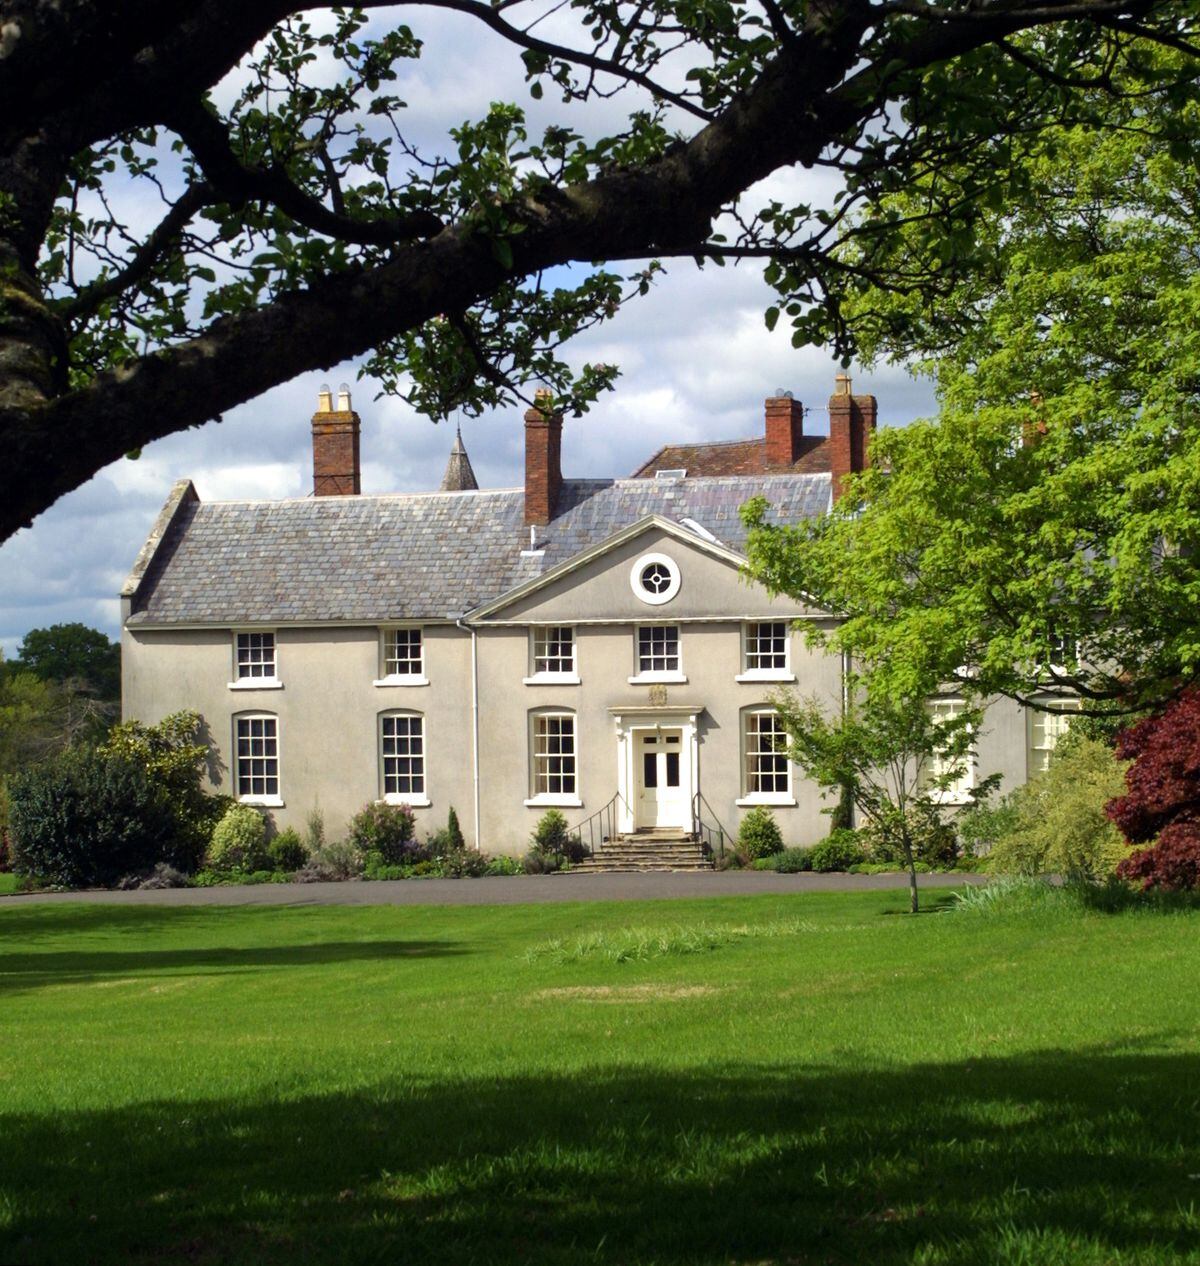 A photo of Bitterley Court. 